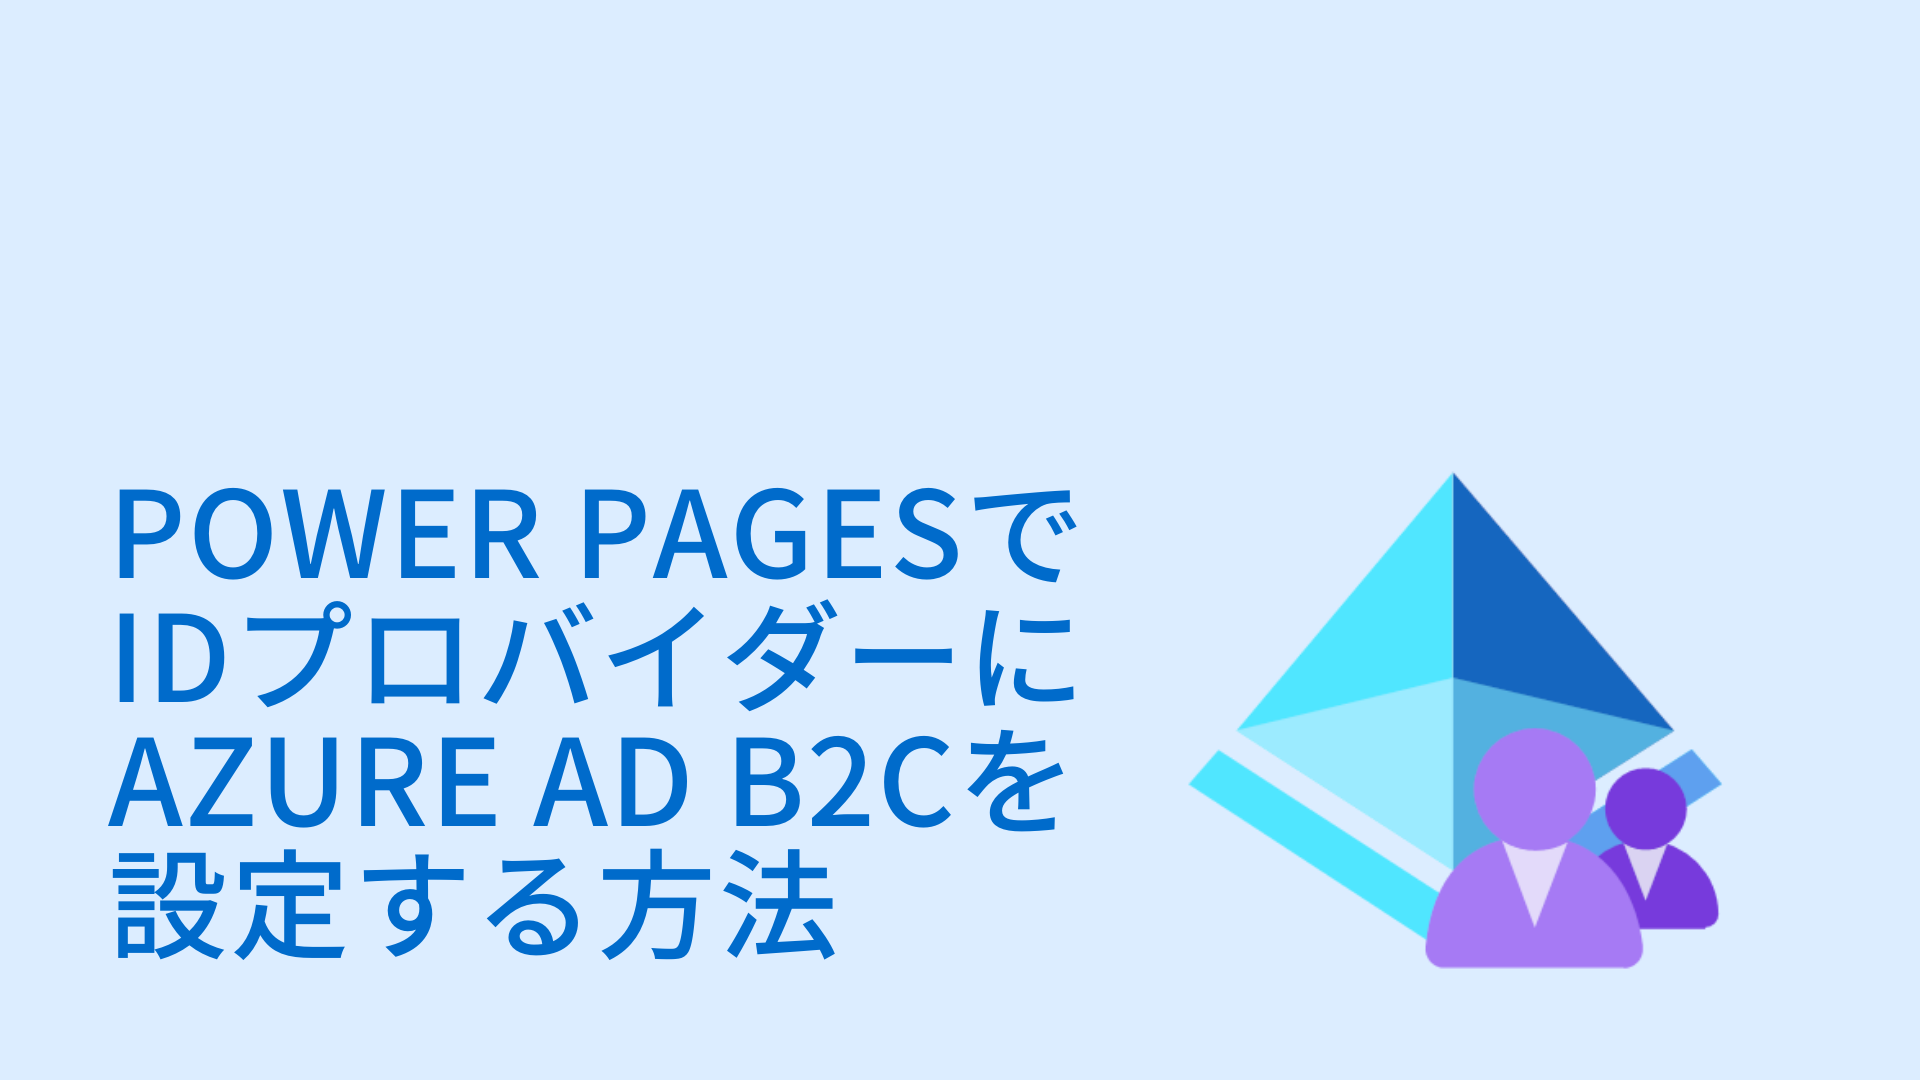 Power PagesでAzure AD B2CをIDプロバイダーに設定する方法 (1).png